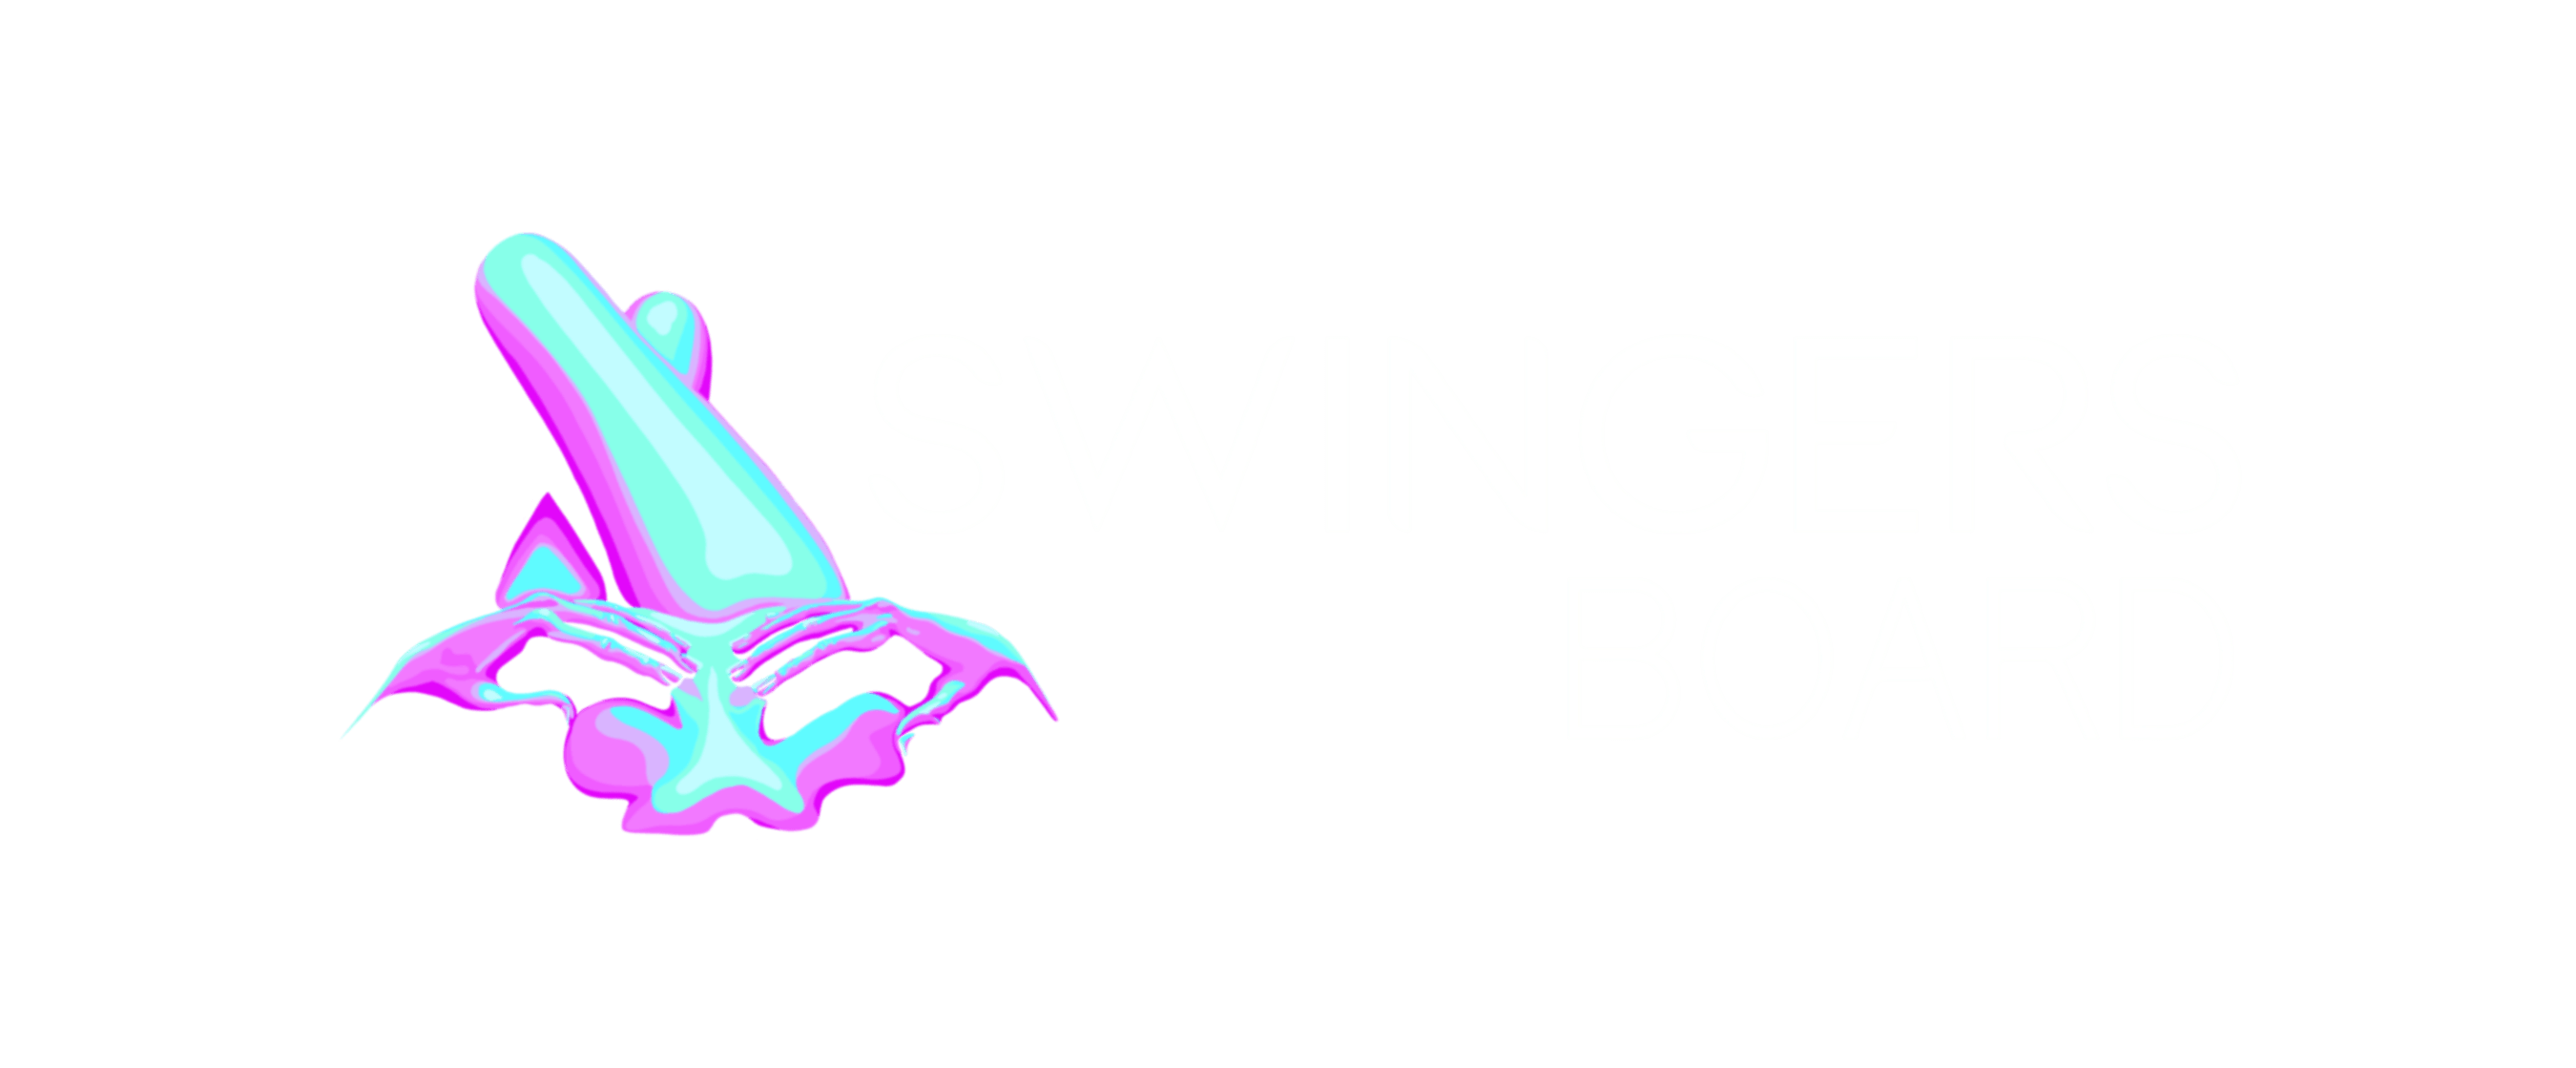 group booking number 🌈🌌𝟏𝟖𝟖𝟖😳𝟕𝟏𝟎😳𝟖𝟏𝟒𝟔🌈🌌 delta airlines date change number - Curious About Swinging? - Swingers Board